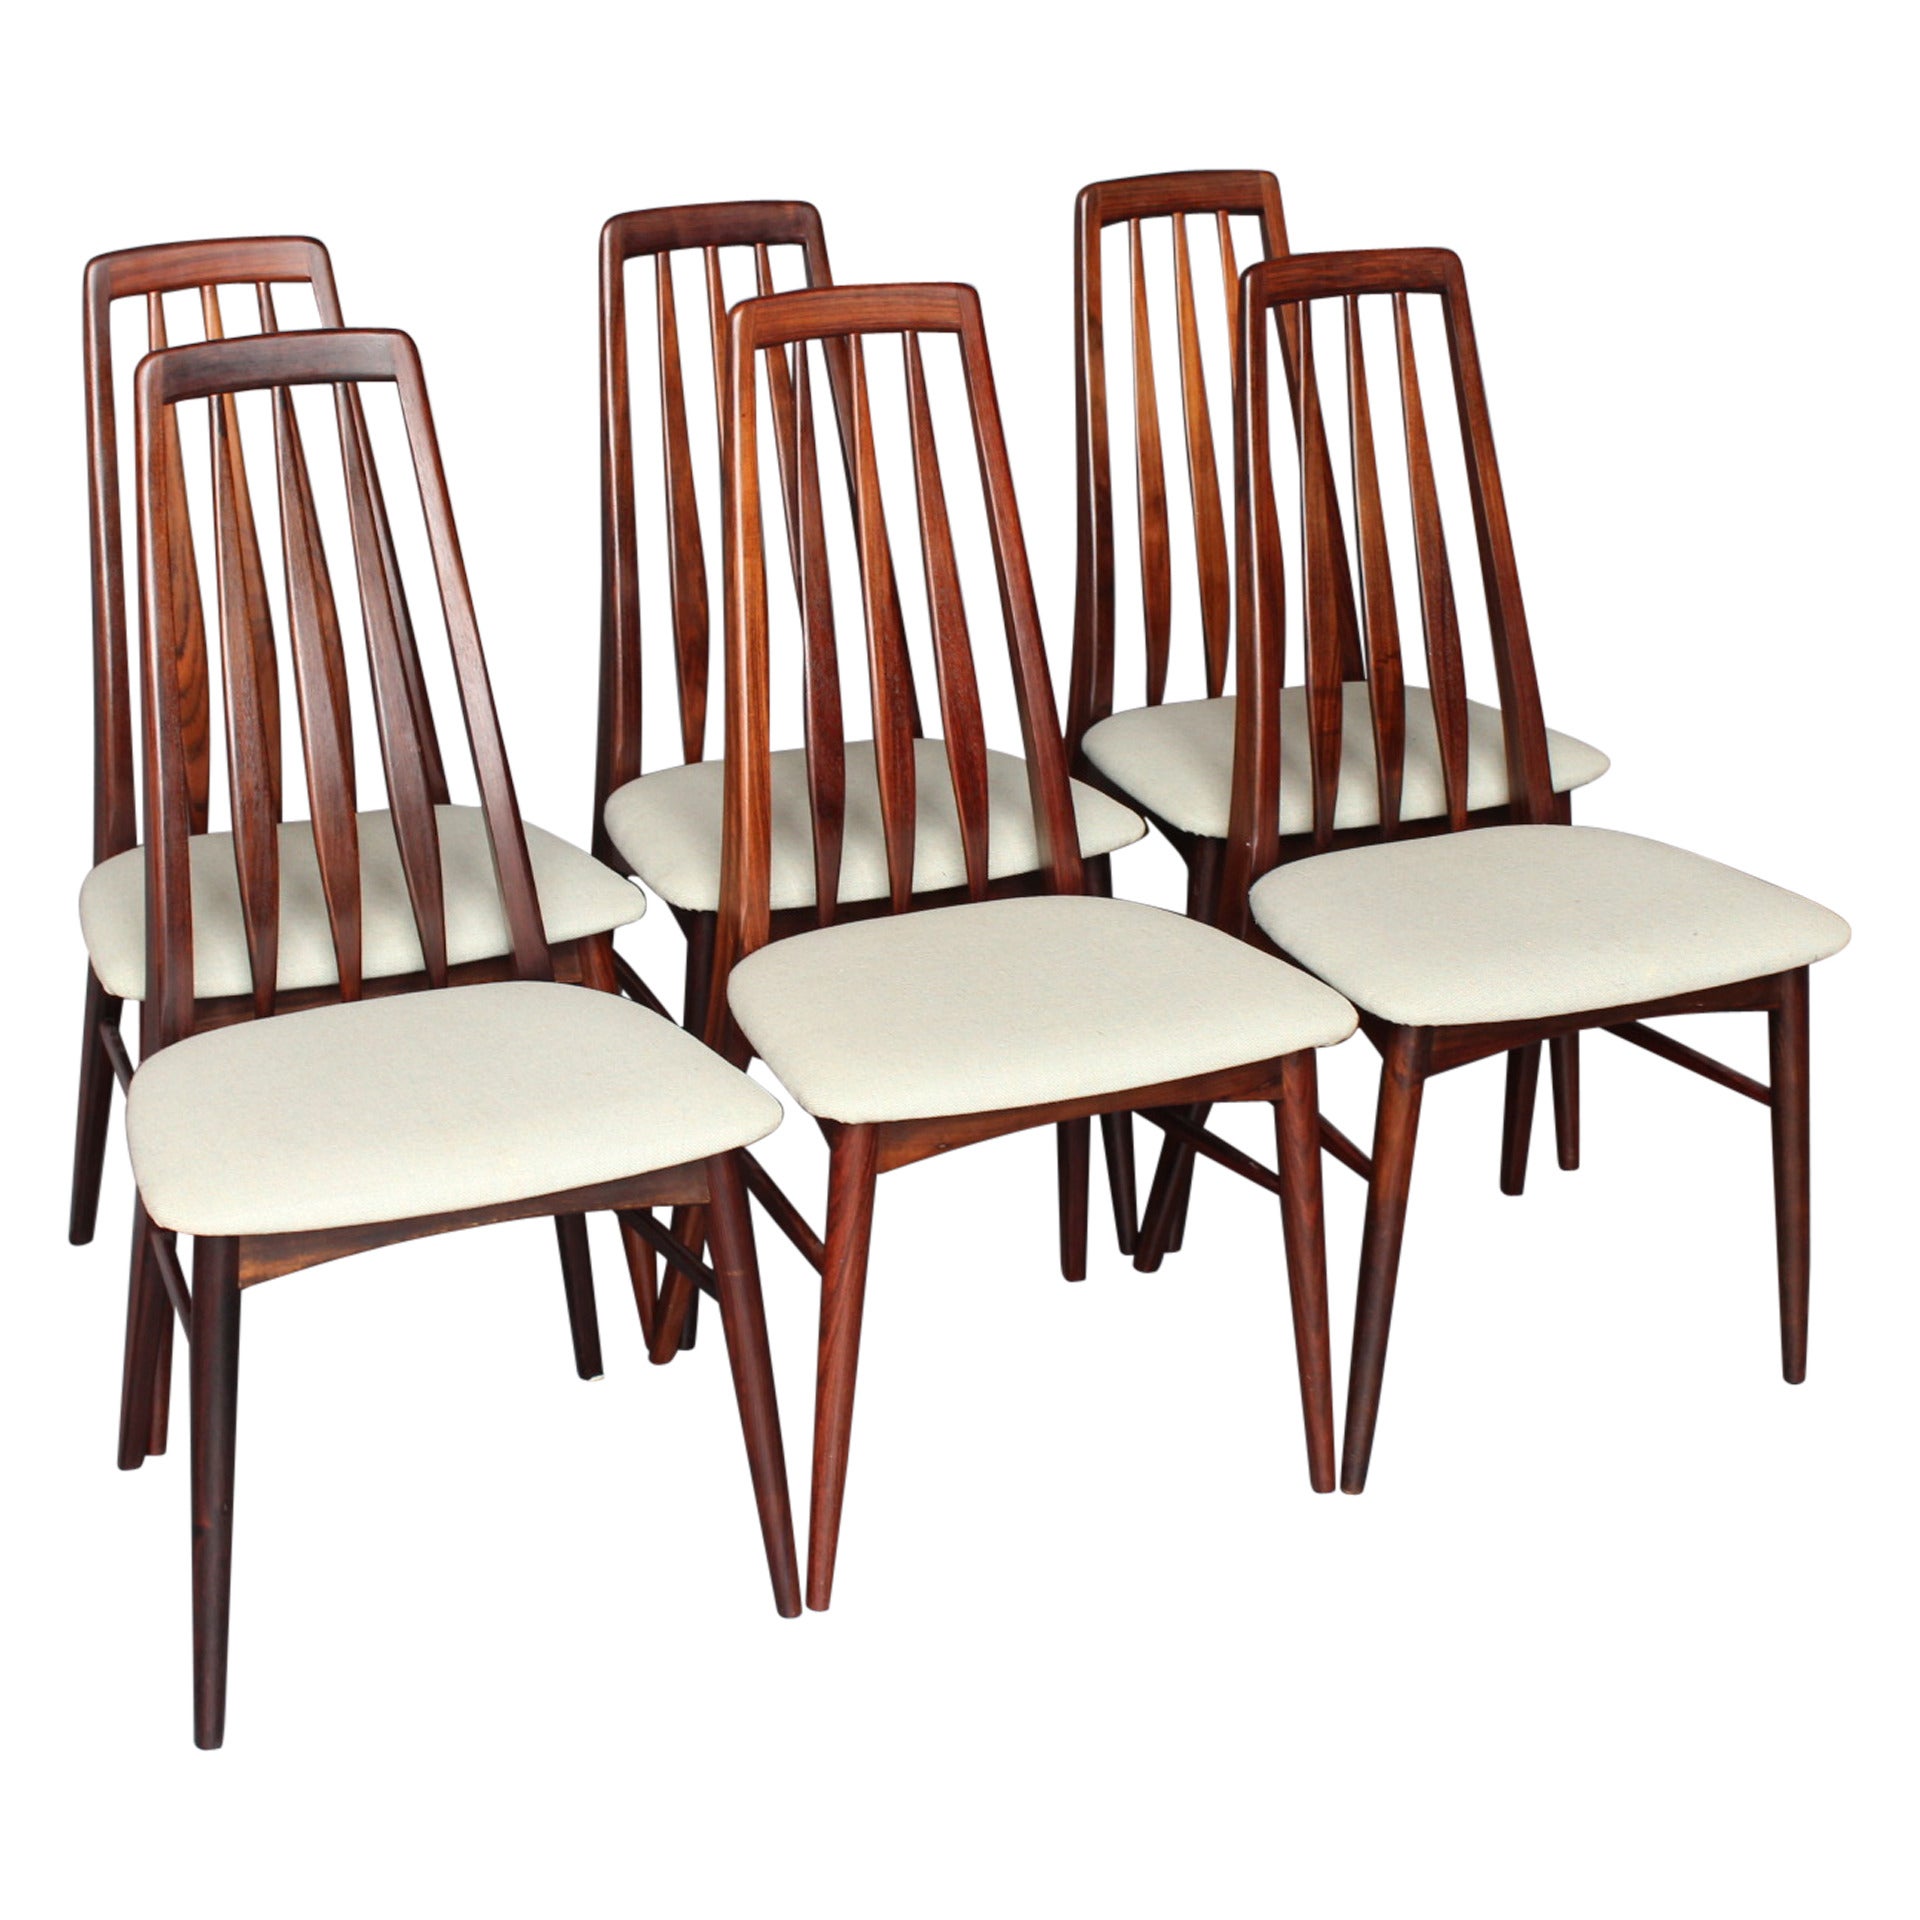 Set of Six, Model Eva, Dining Chairs by Niels Kofoed, 1964